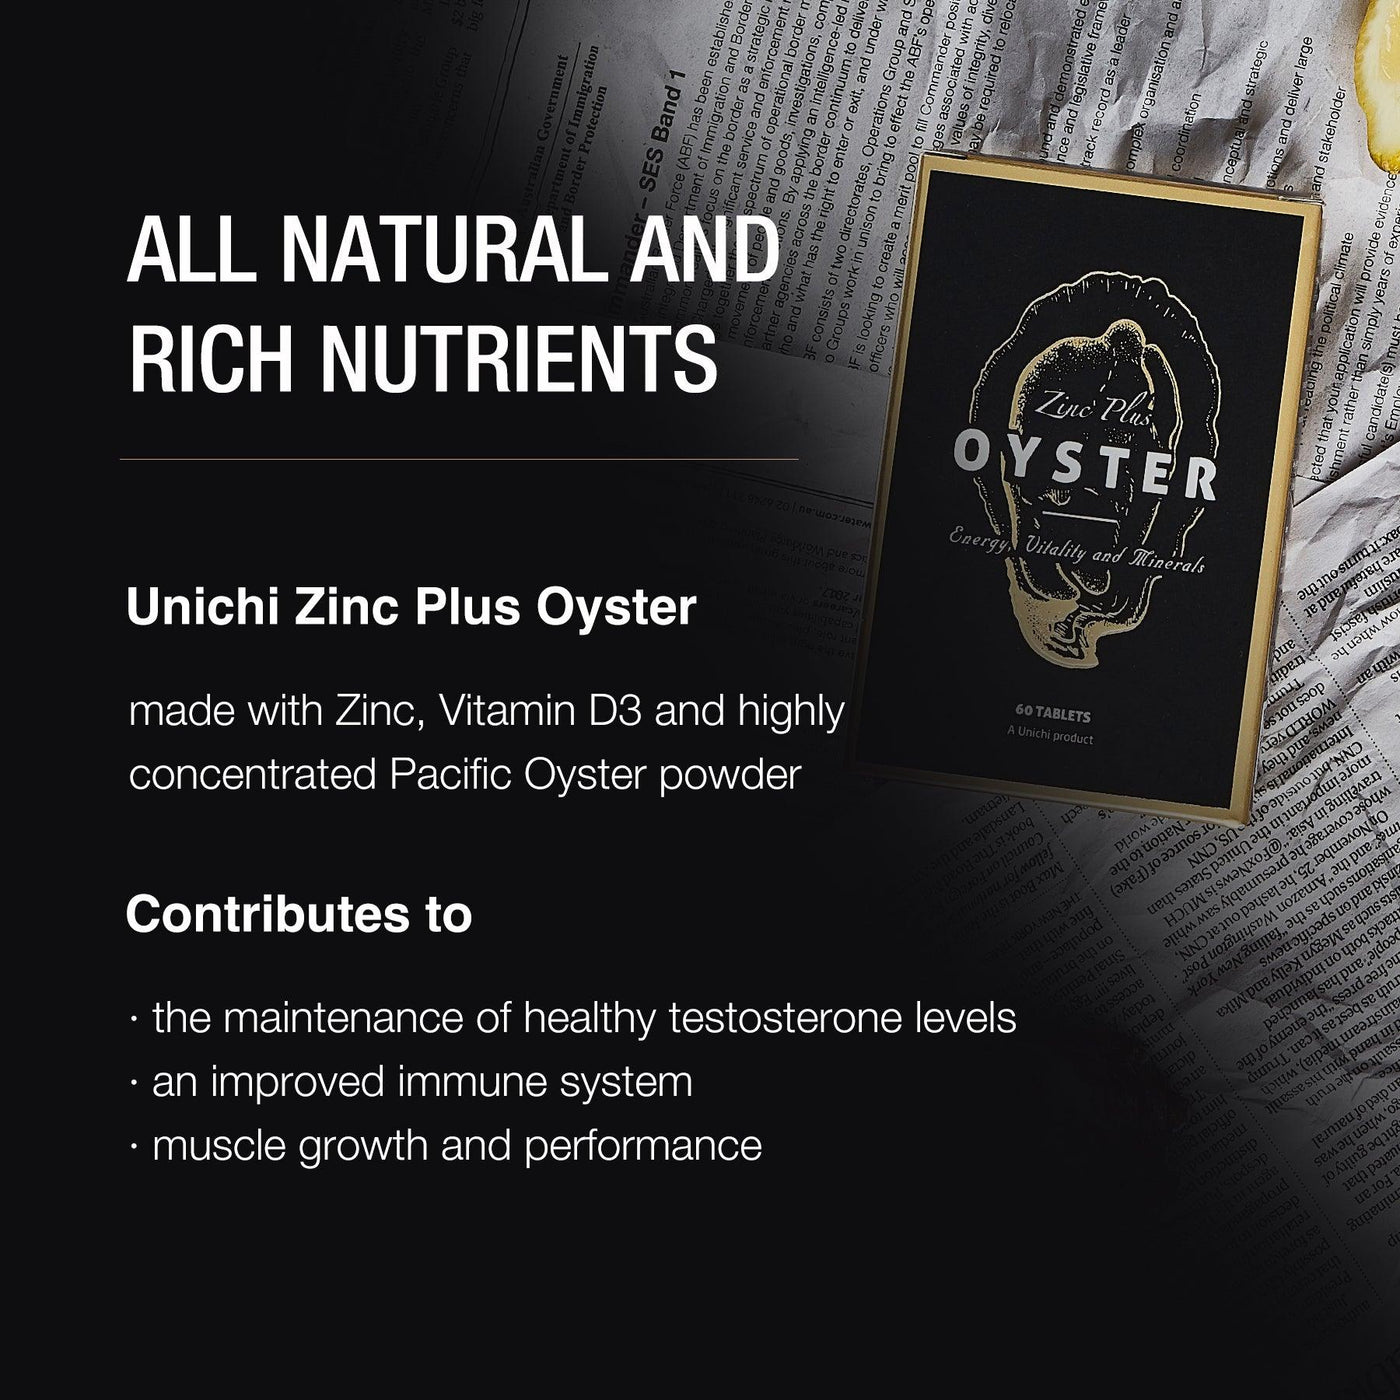 oyster supplements